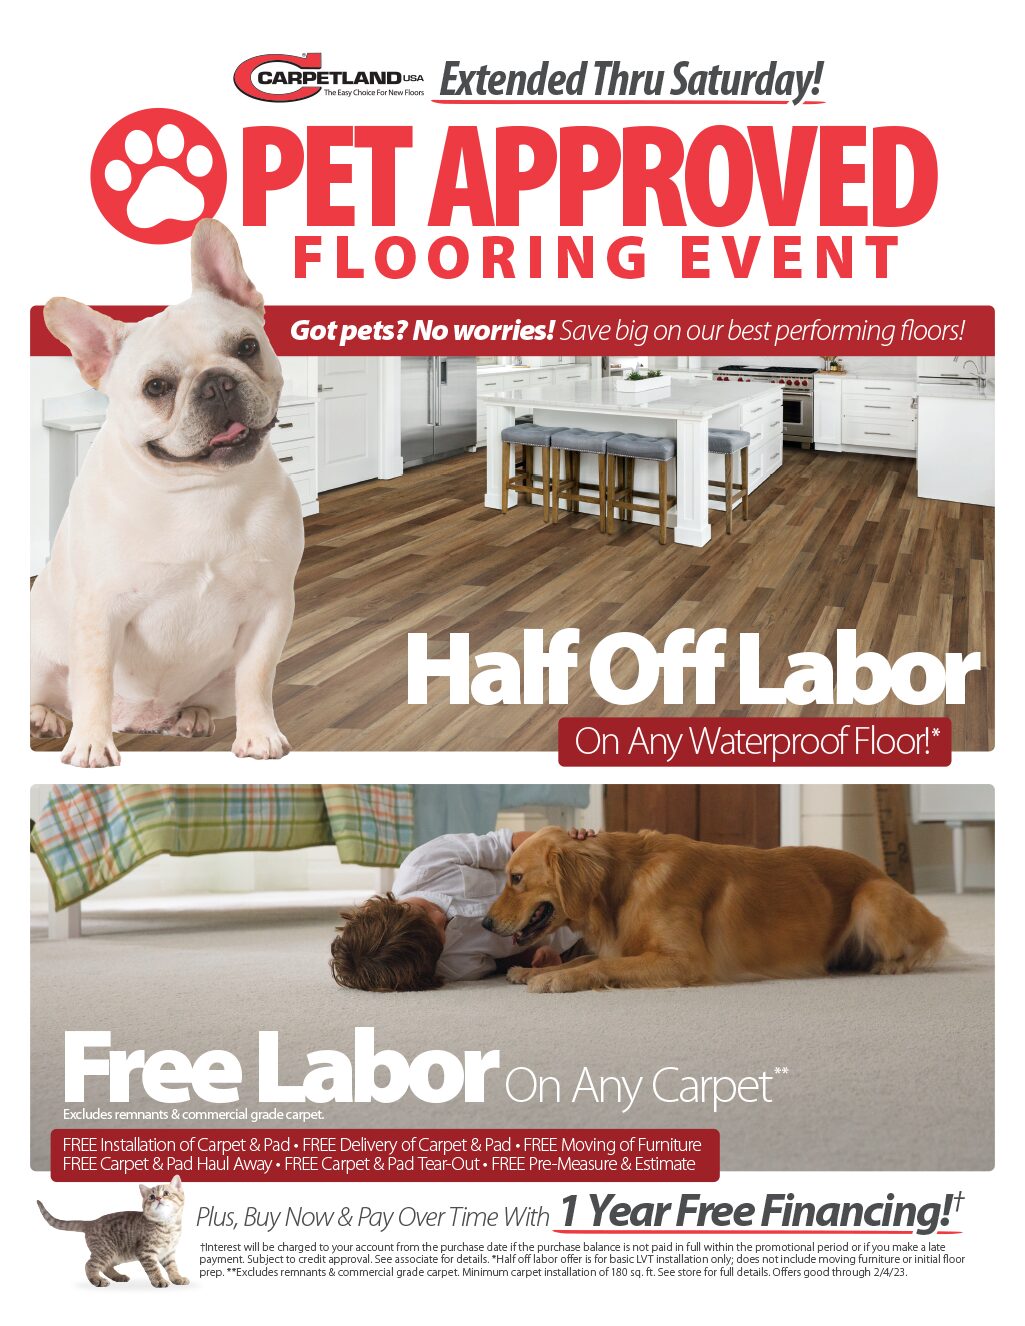 Pet Approved Flooring Event – Extended thru Saturday!